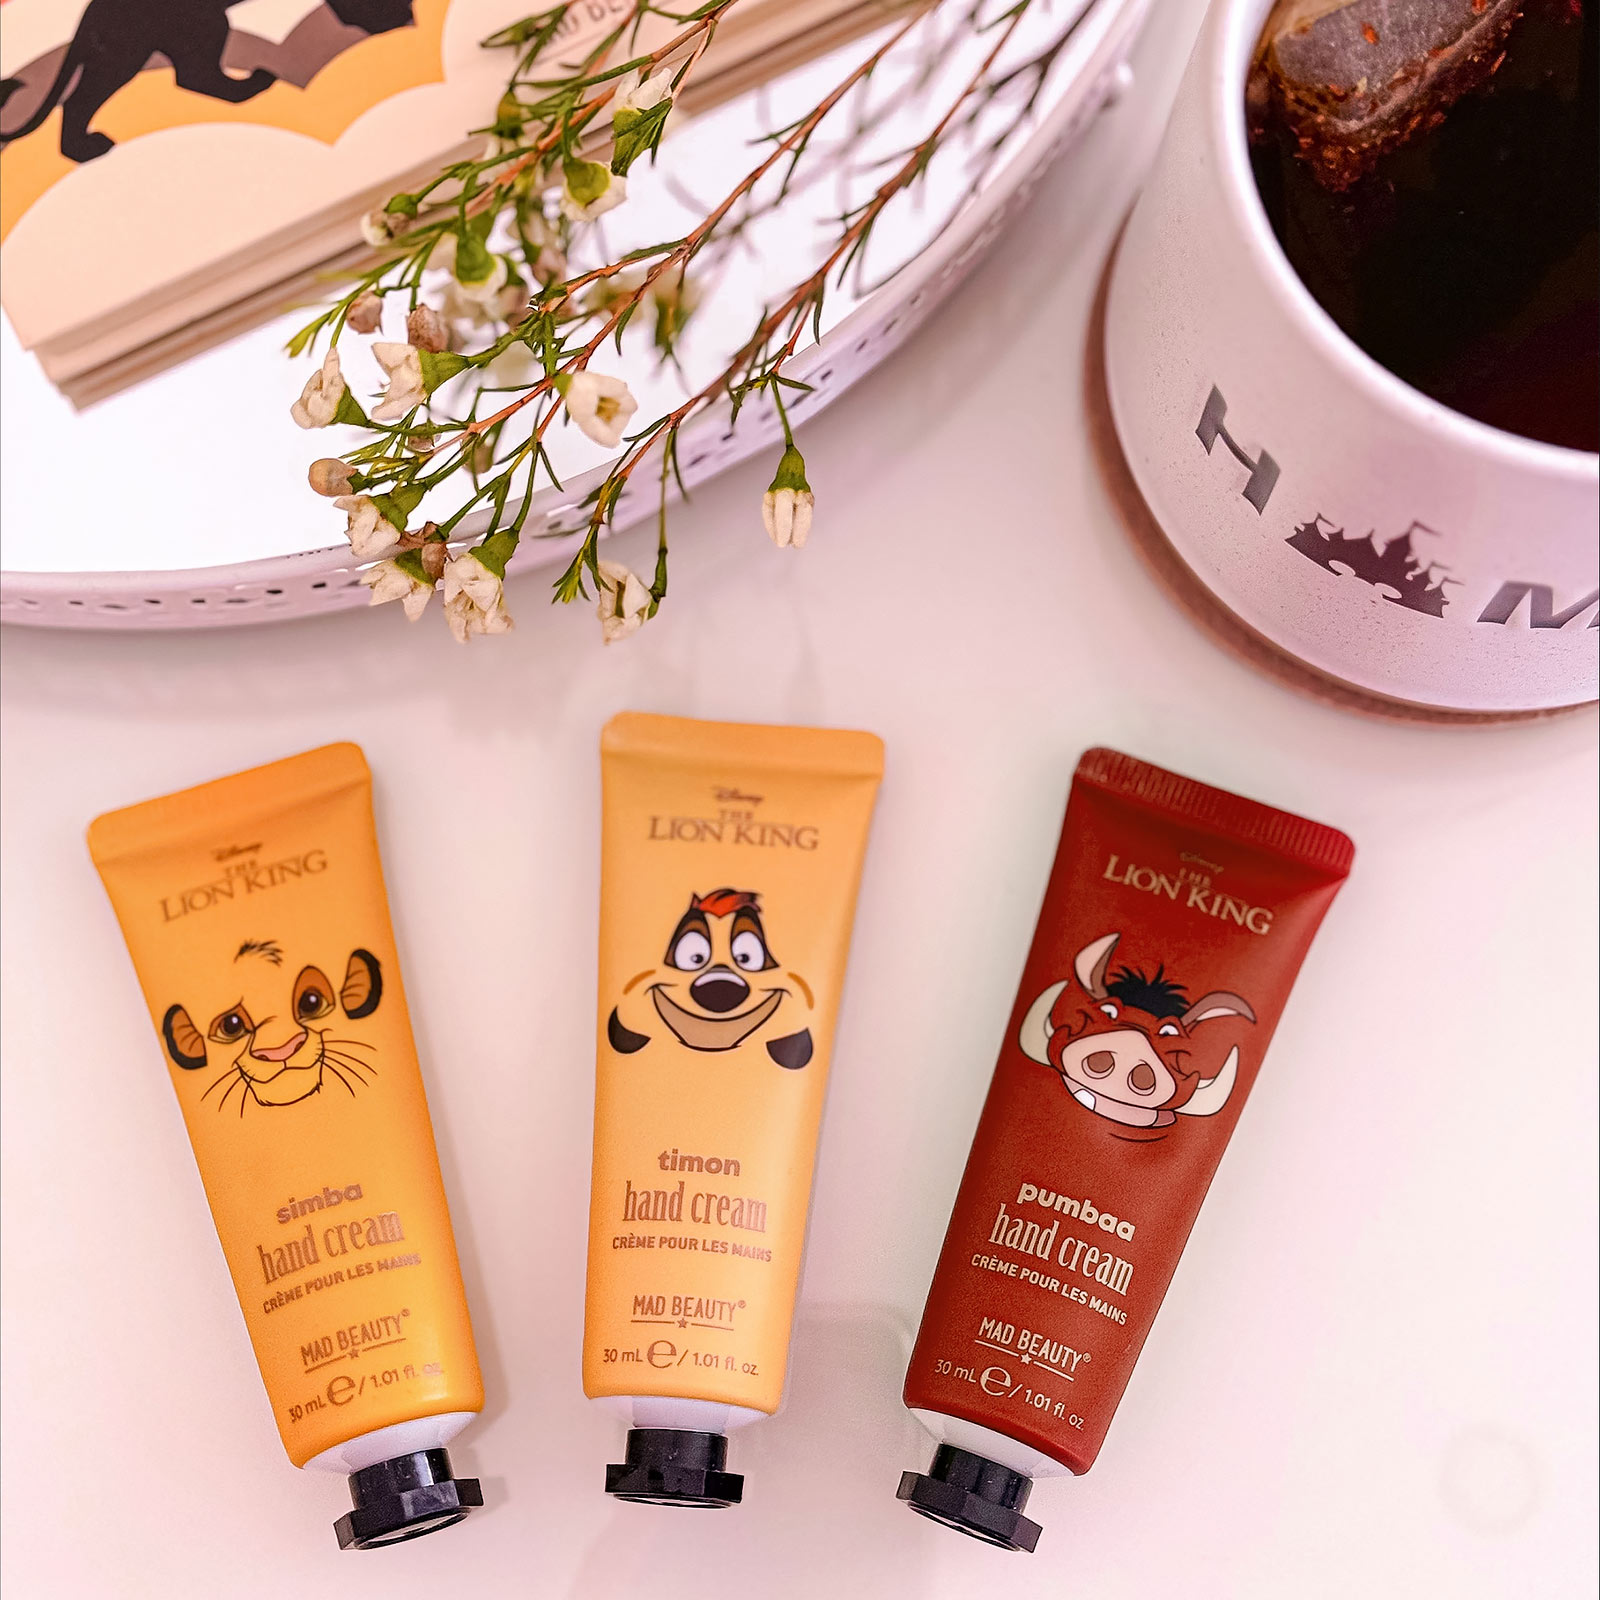 The Lion King - Best of Friends Hand Care Set of 3